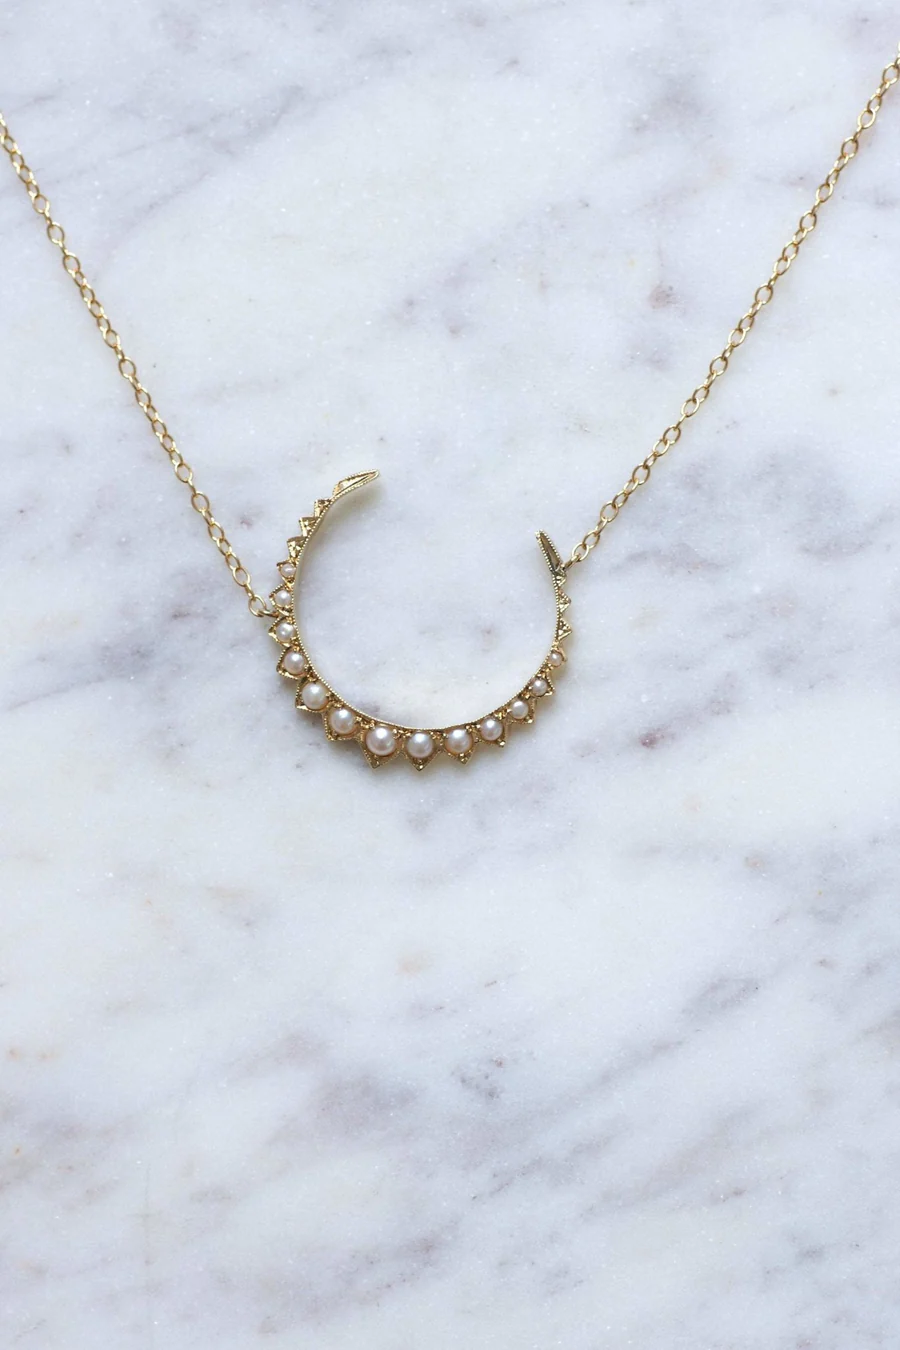 Antique gold and pearl crescent moon necklace - Penelope Gallery